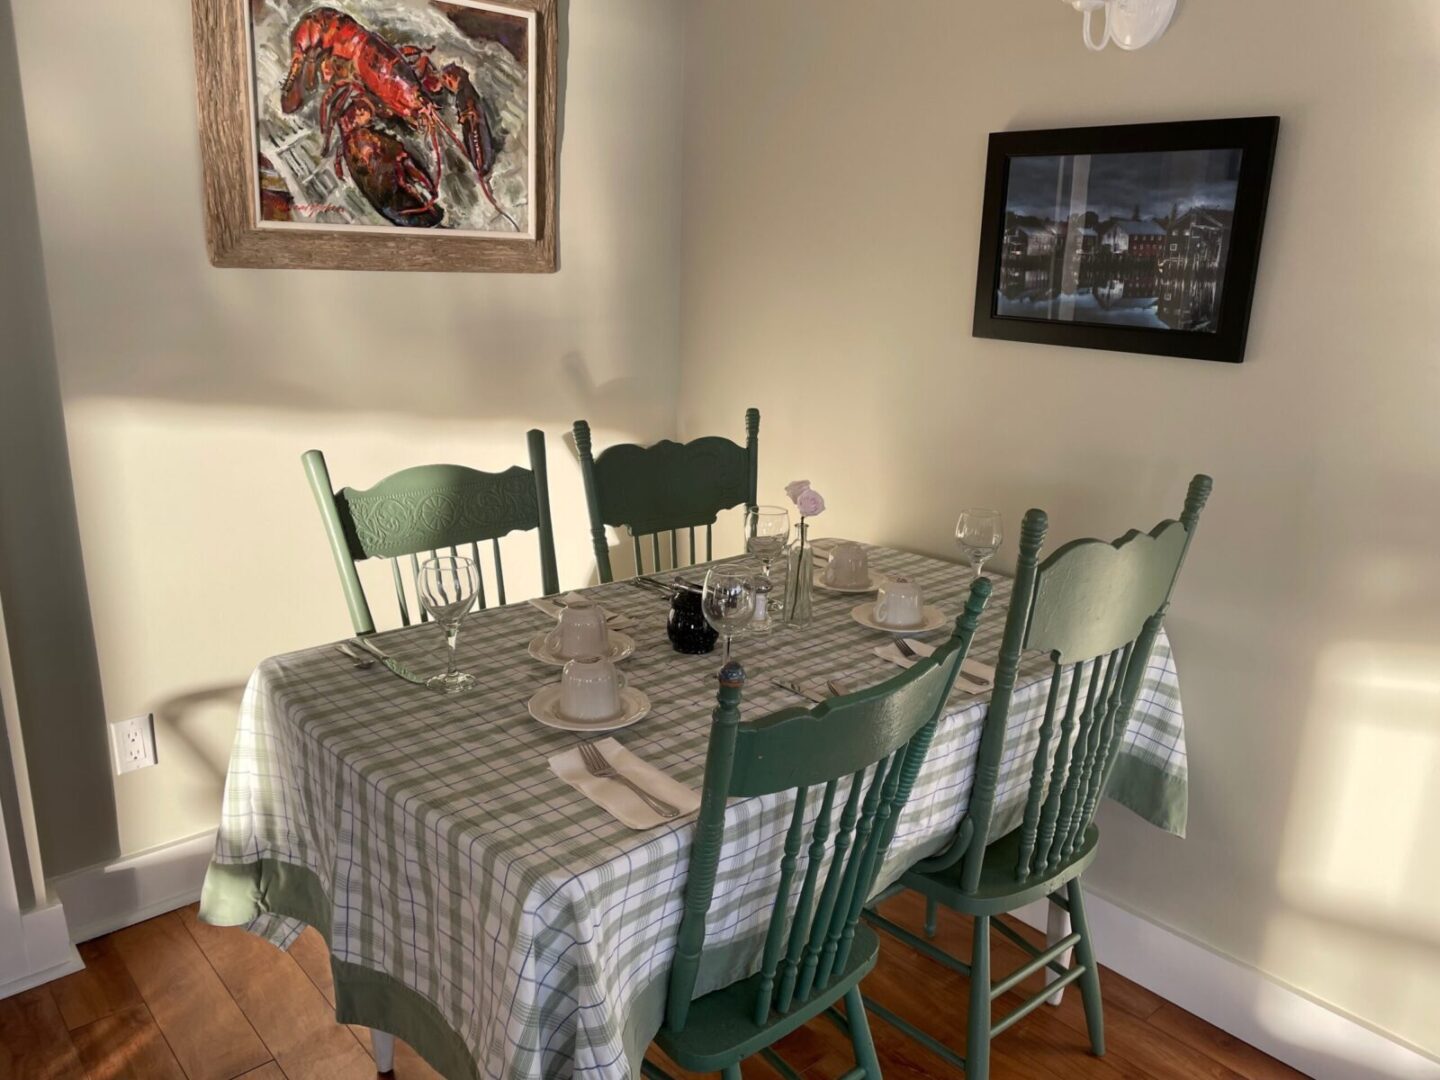 A dining room table with green chairs and a picture.